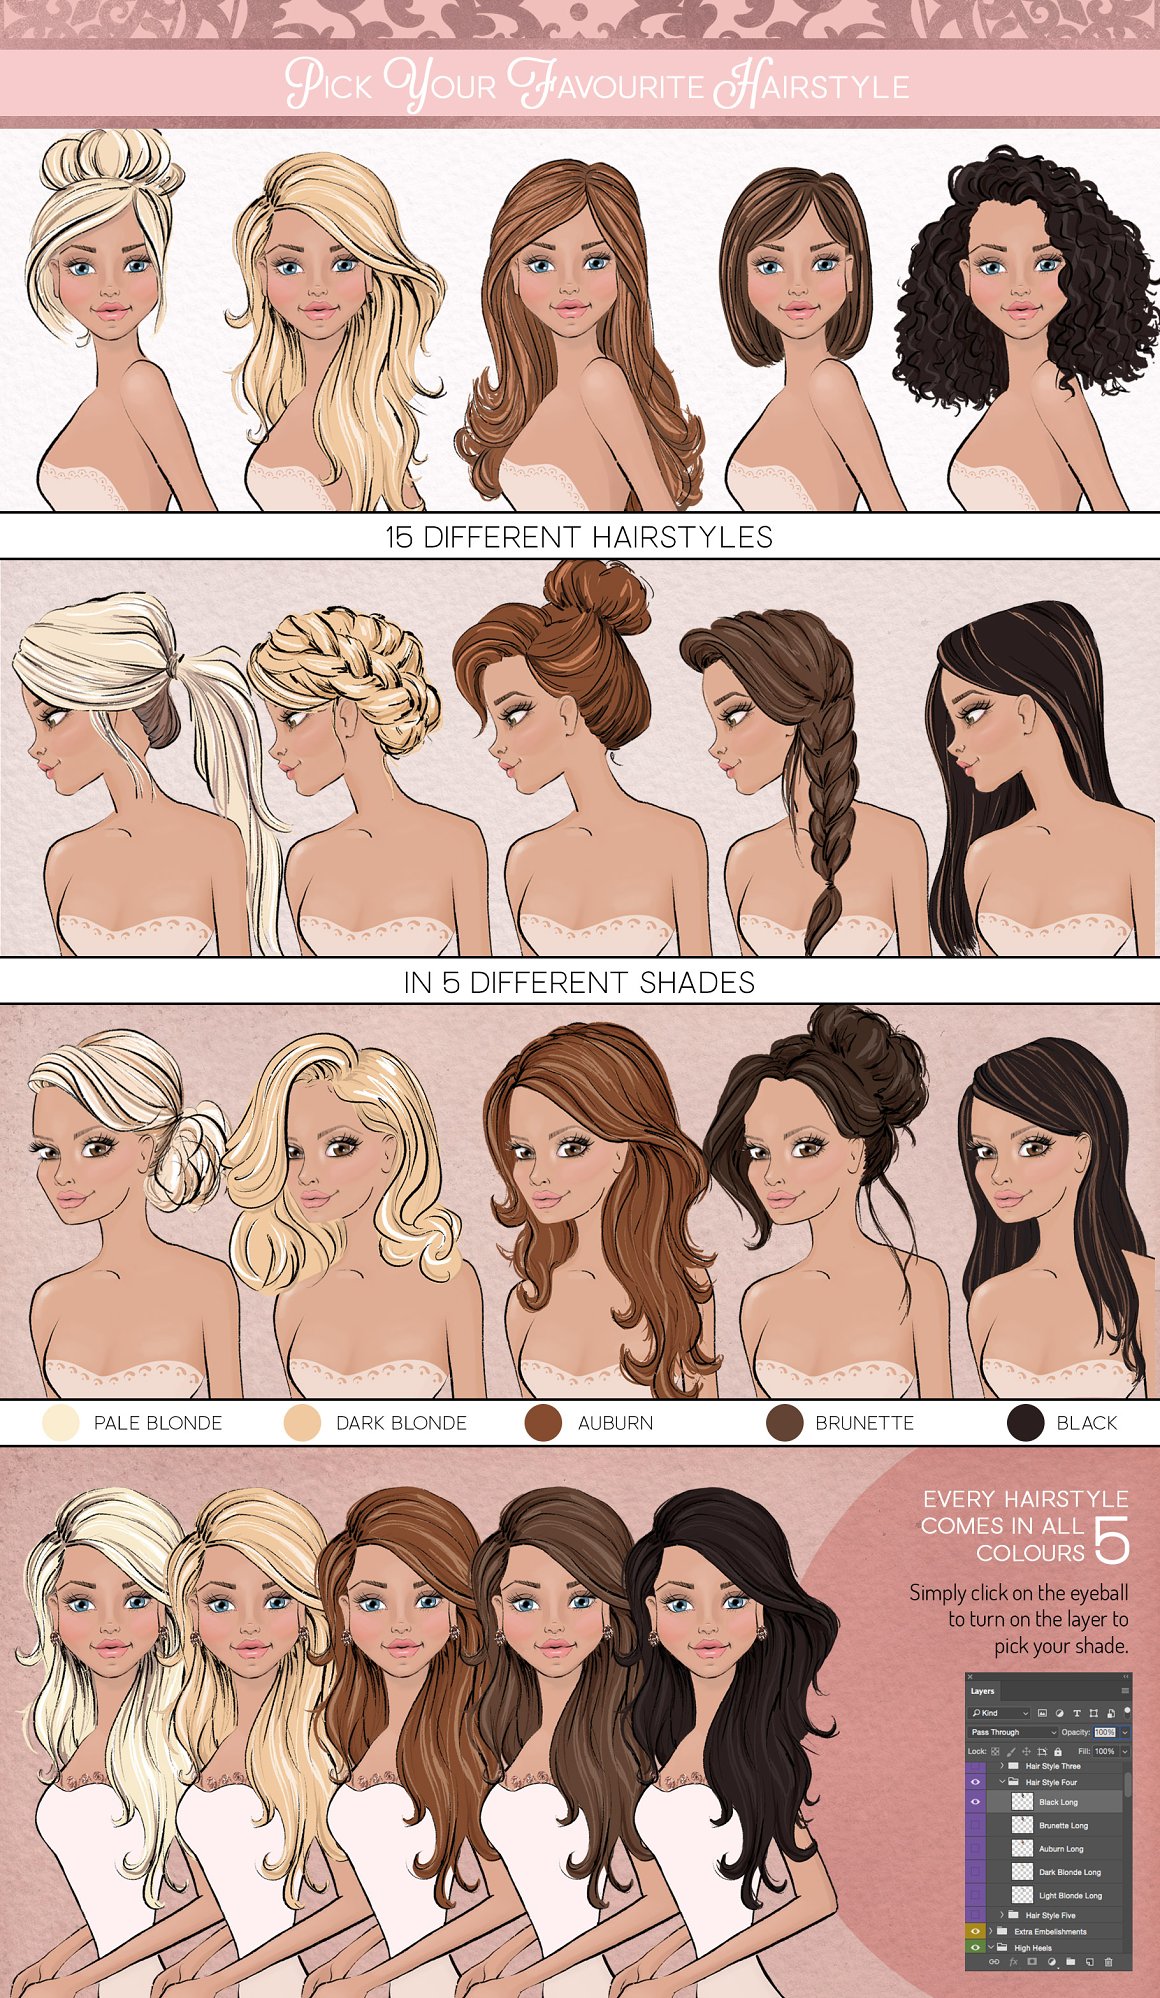 Ladies with different hairstyles and hair colors.